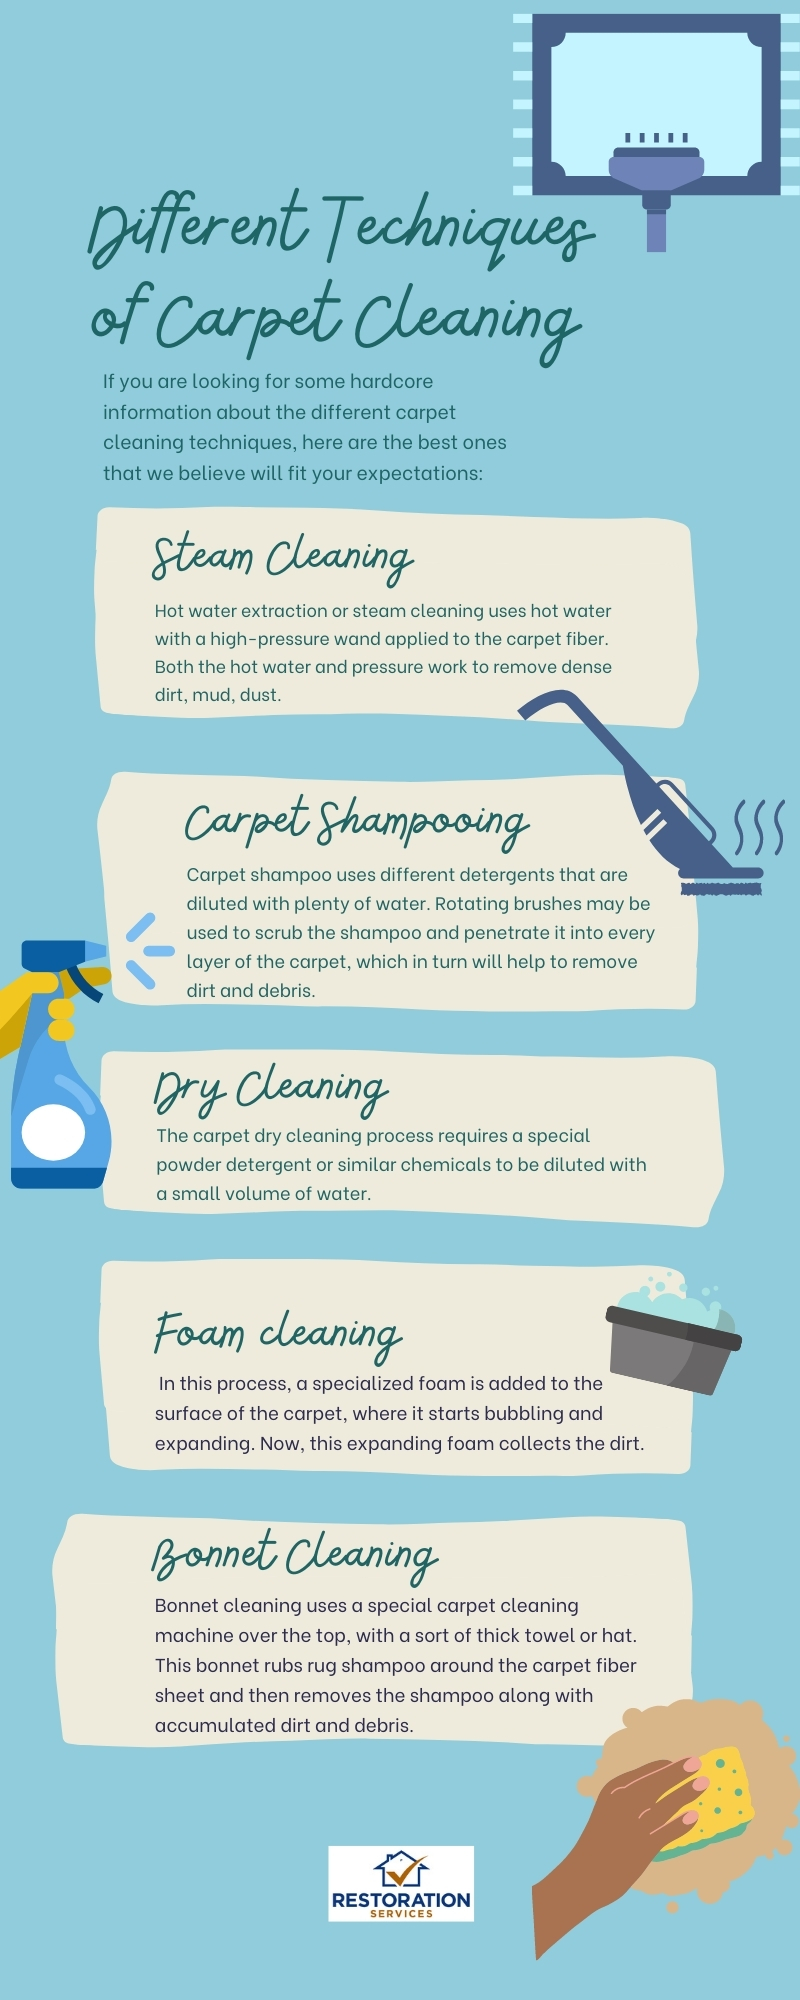 Different techniques of carpet cleaning